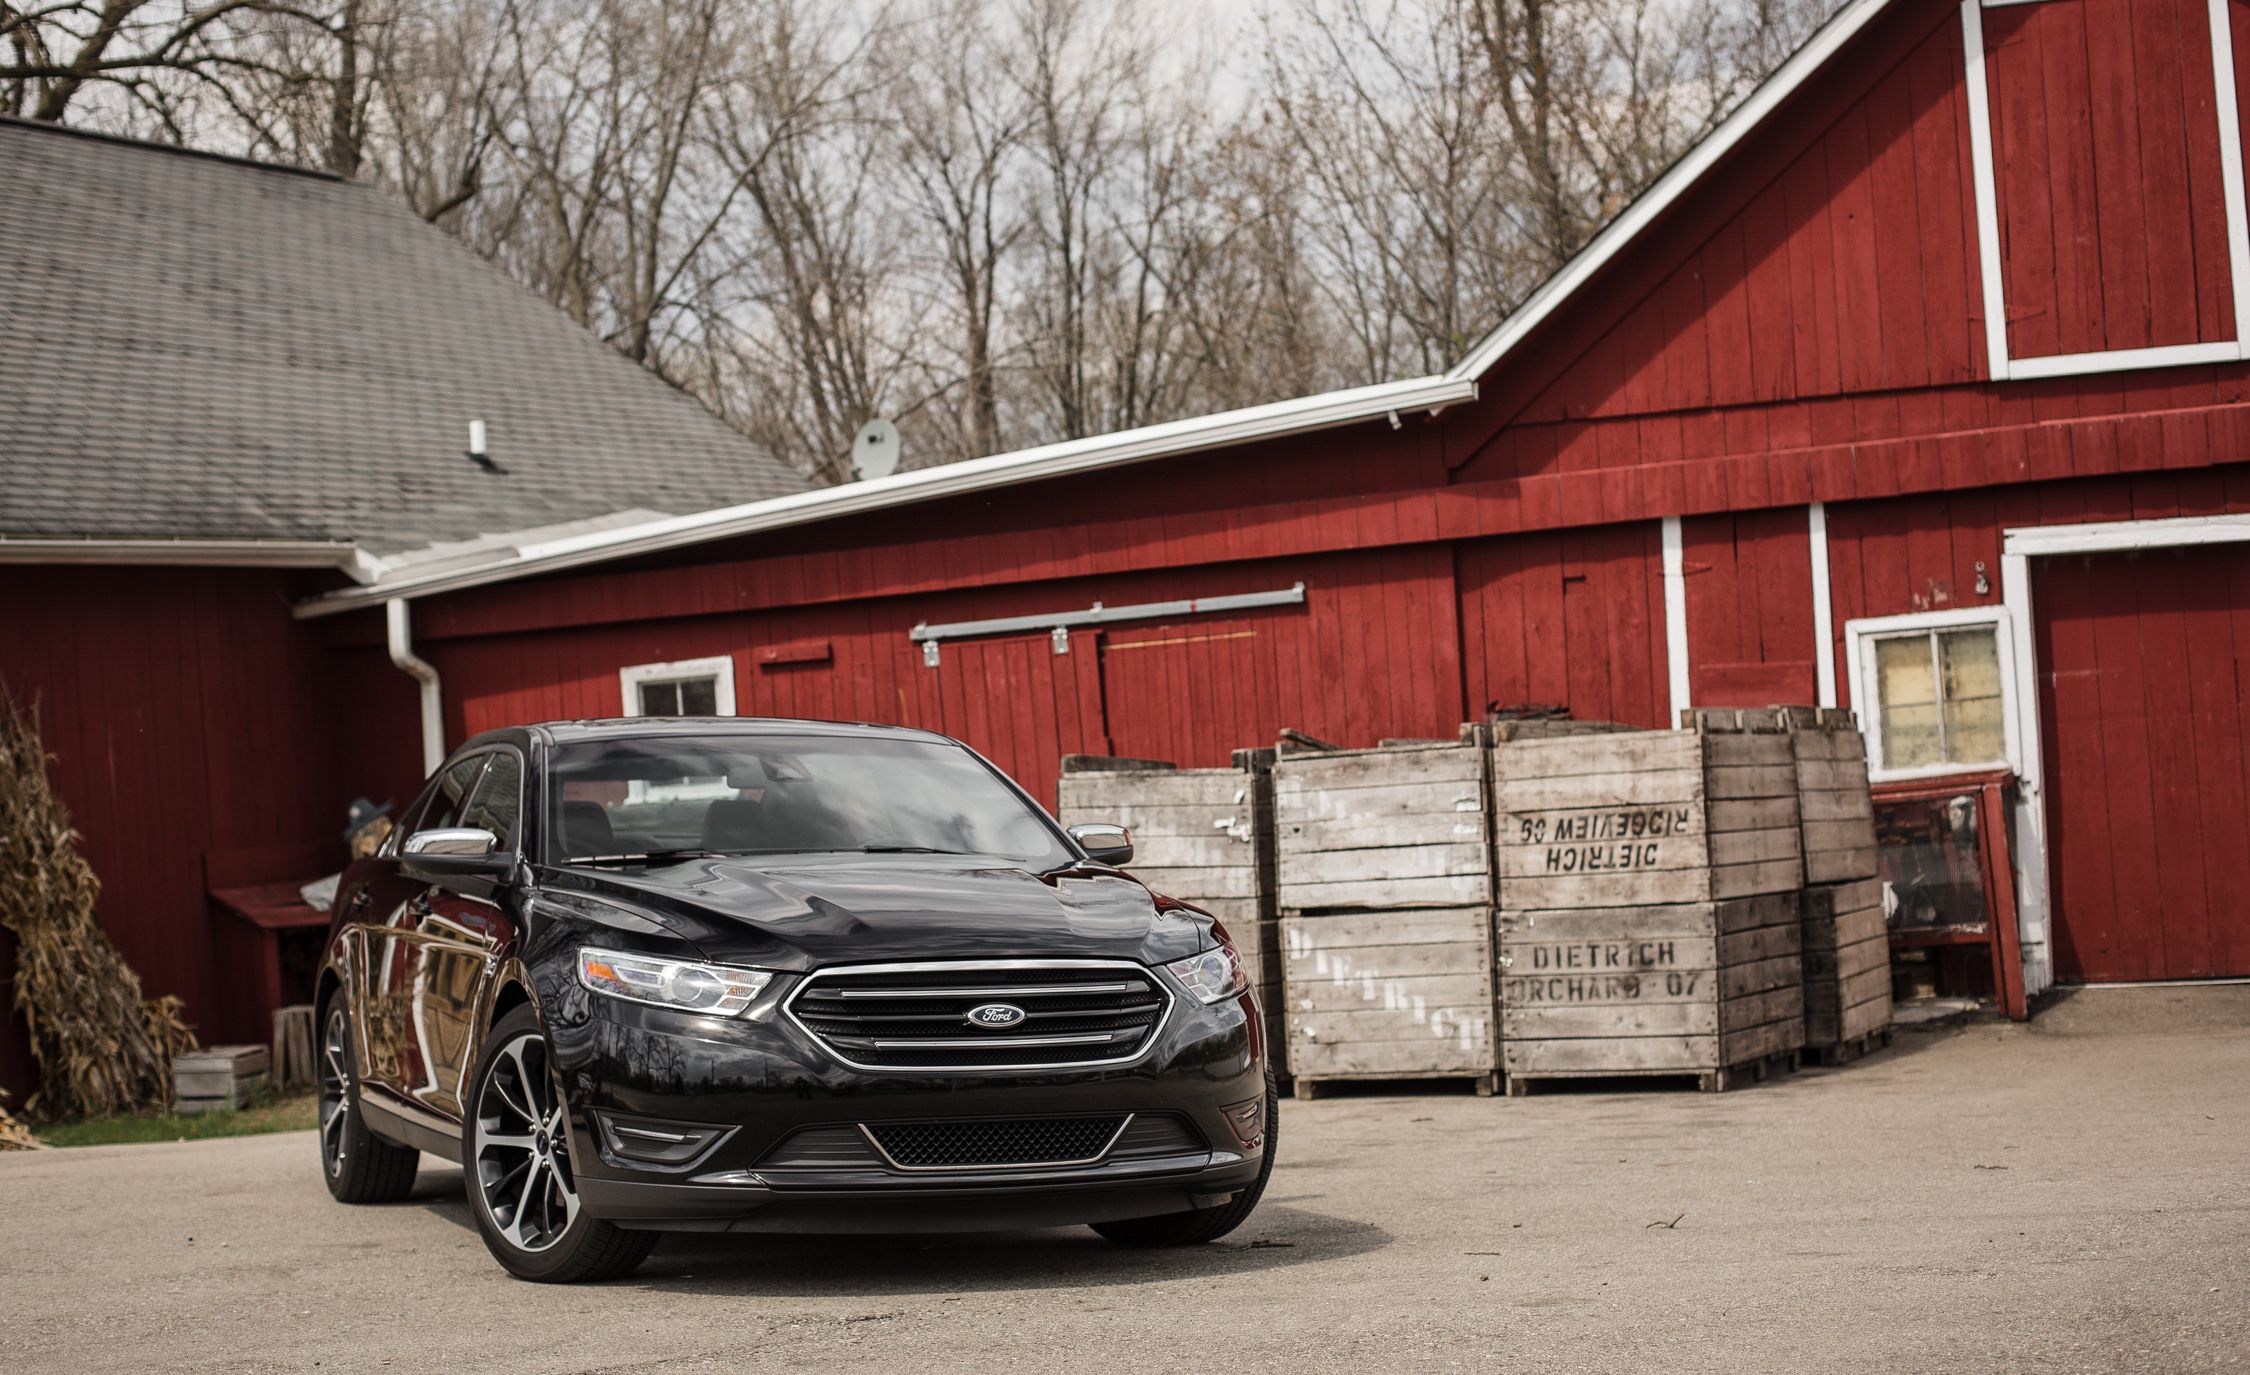 Tested: 2013 Ford Taurus SHO is Now a Full-Size Powerhouse